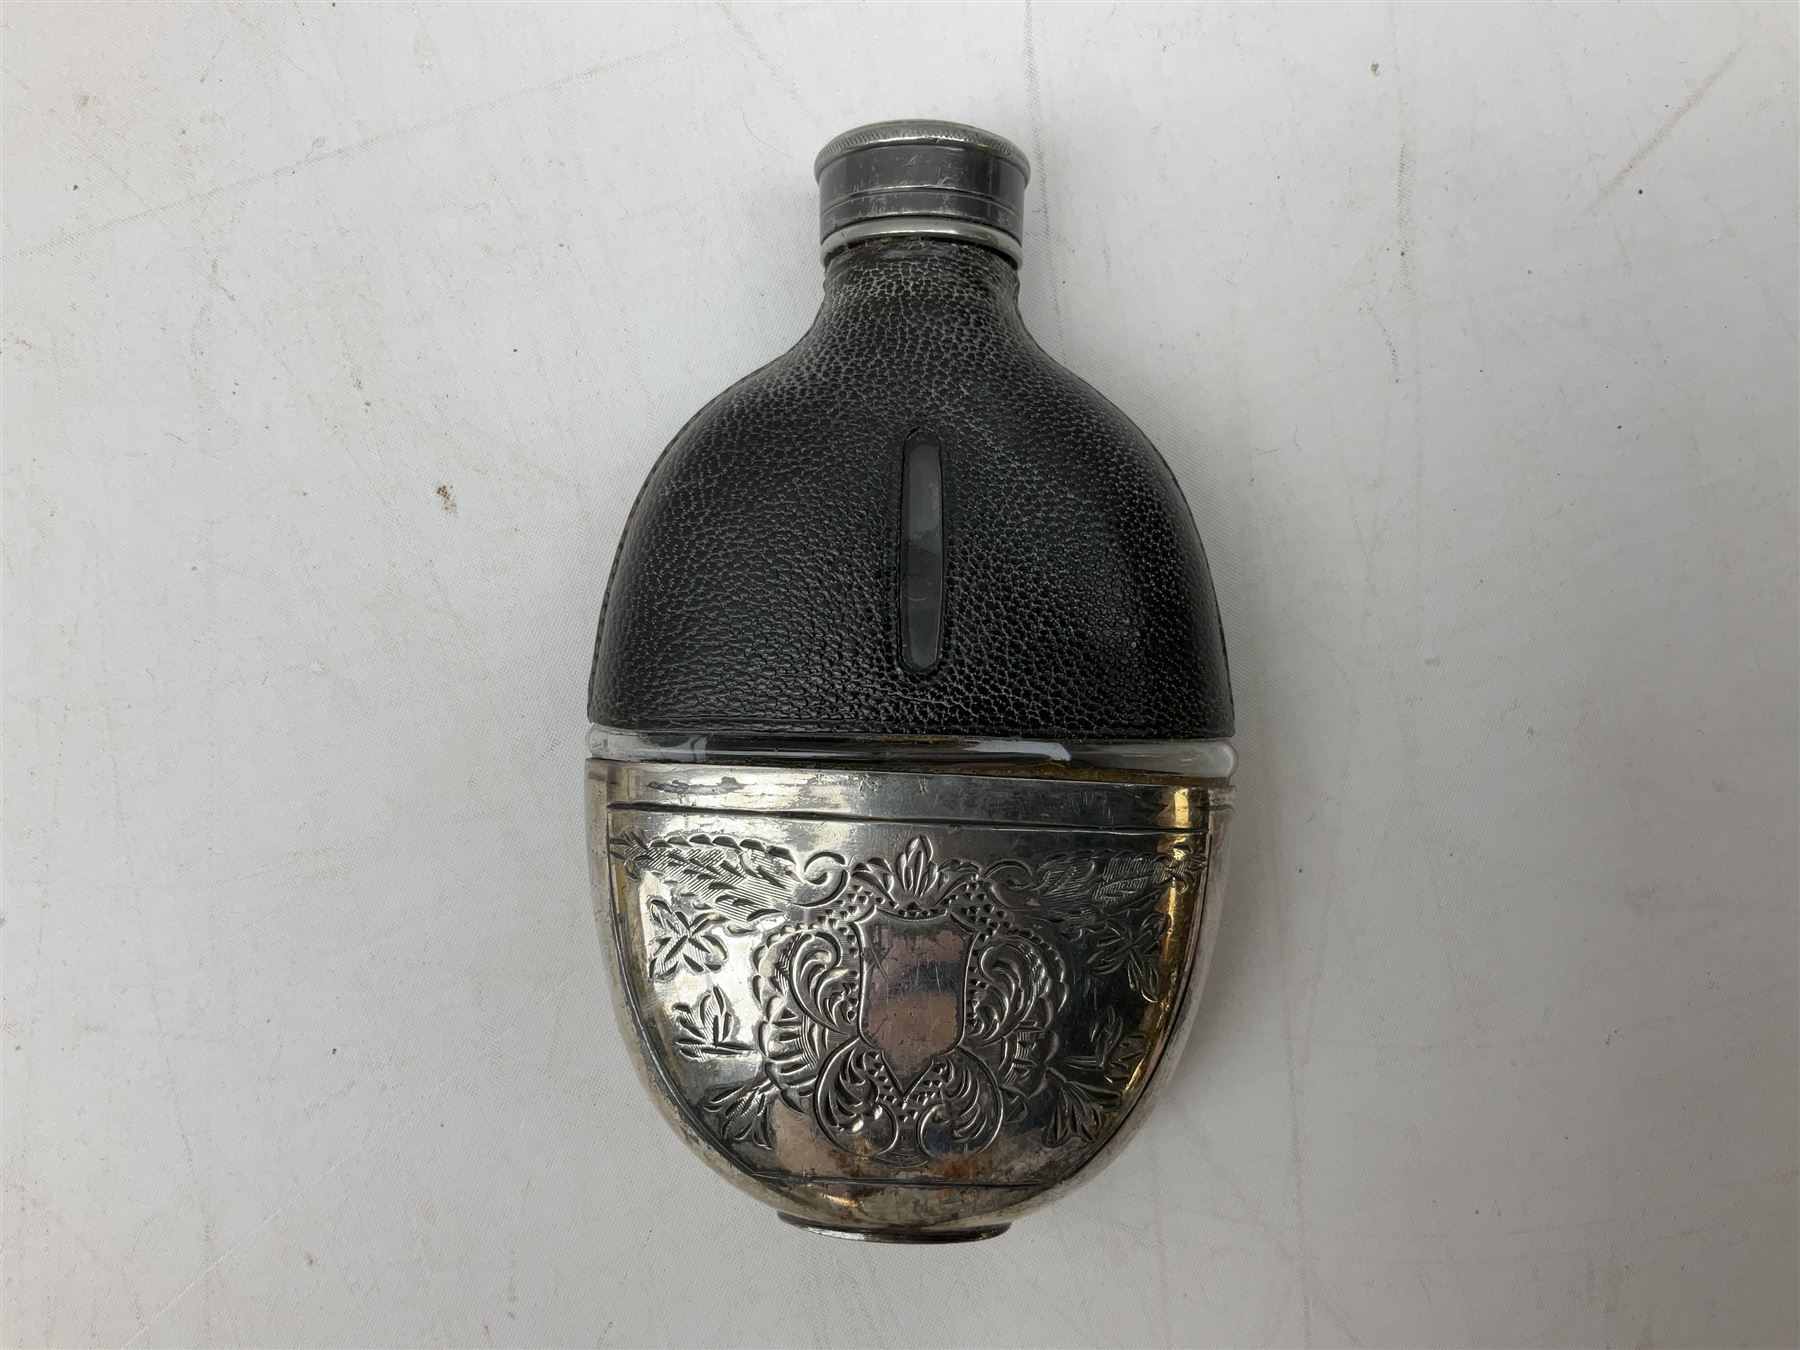 Hip flask by G & J Hawksley - Image 4 of 9